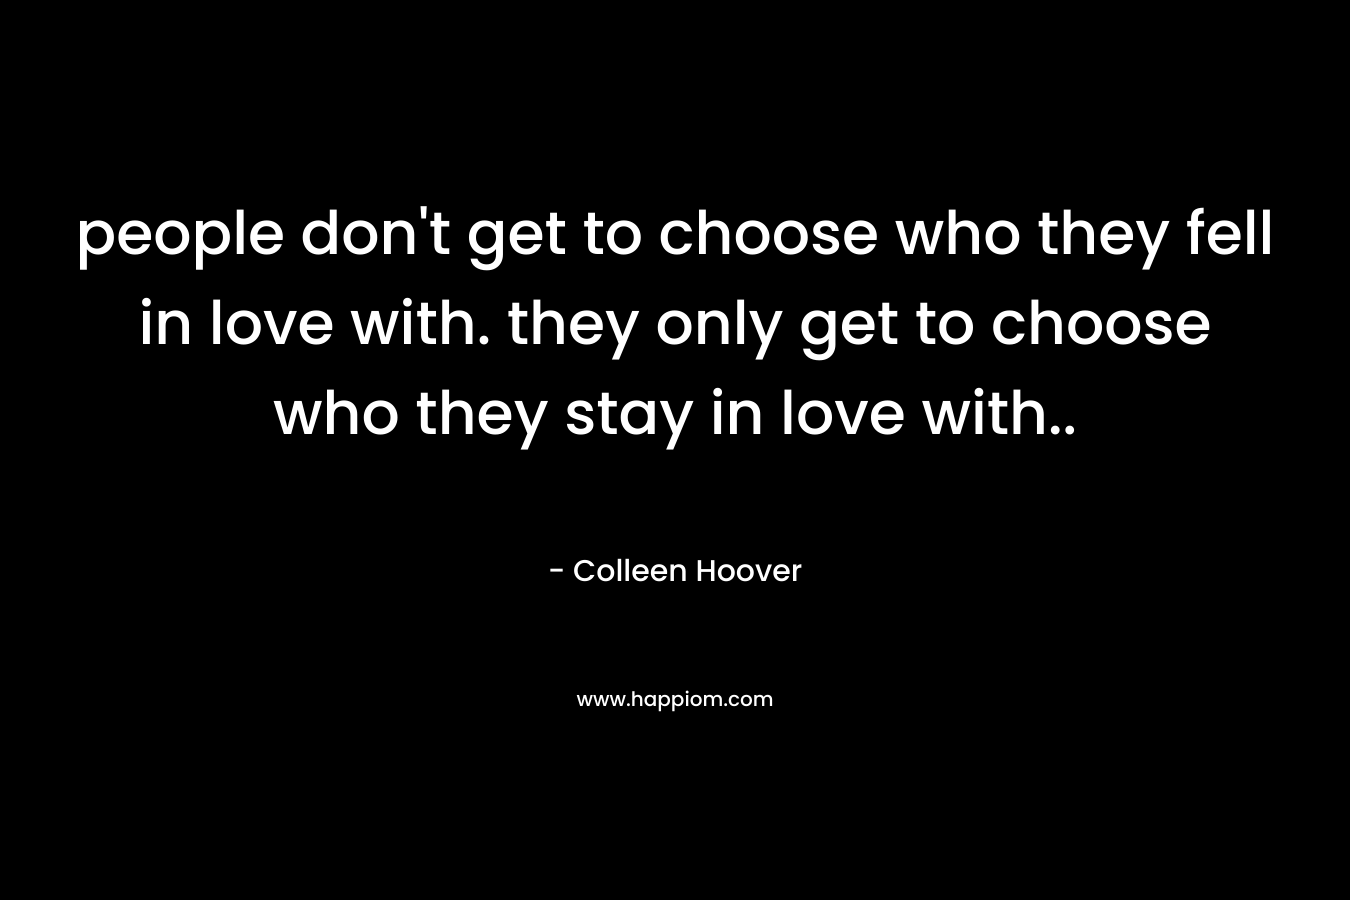 people don't get to choose who they fell in love with. they only get to choose who they stay in love with..